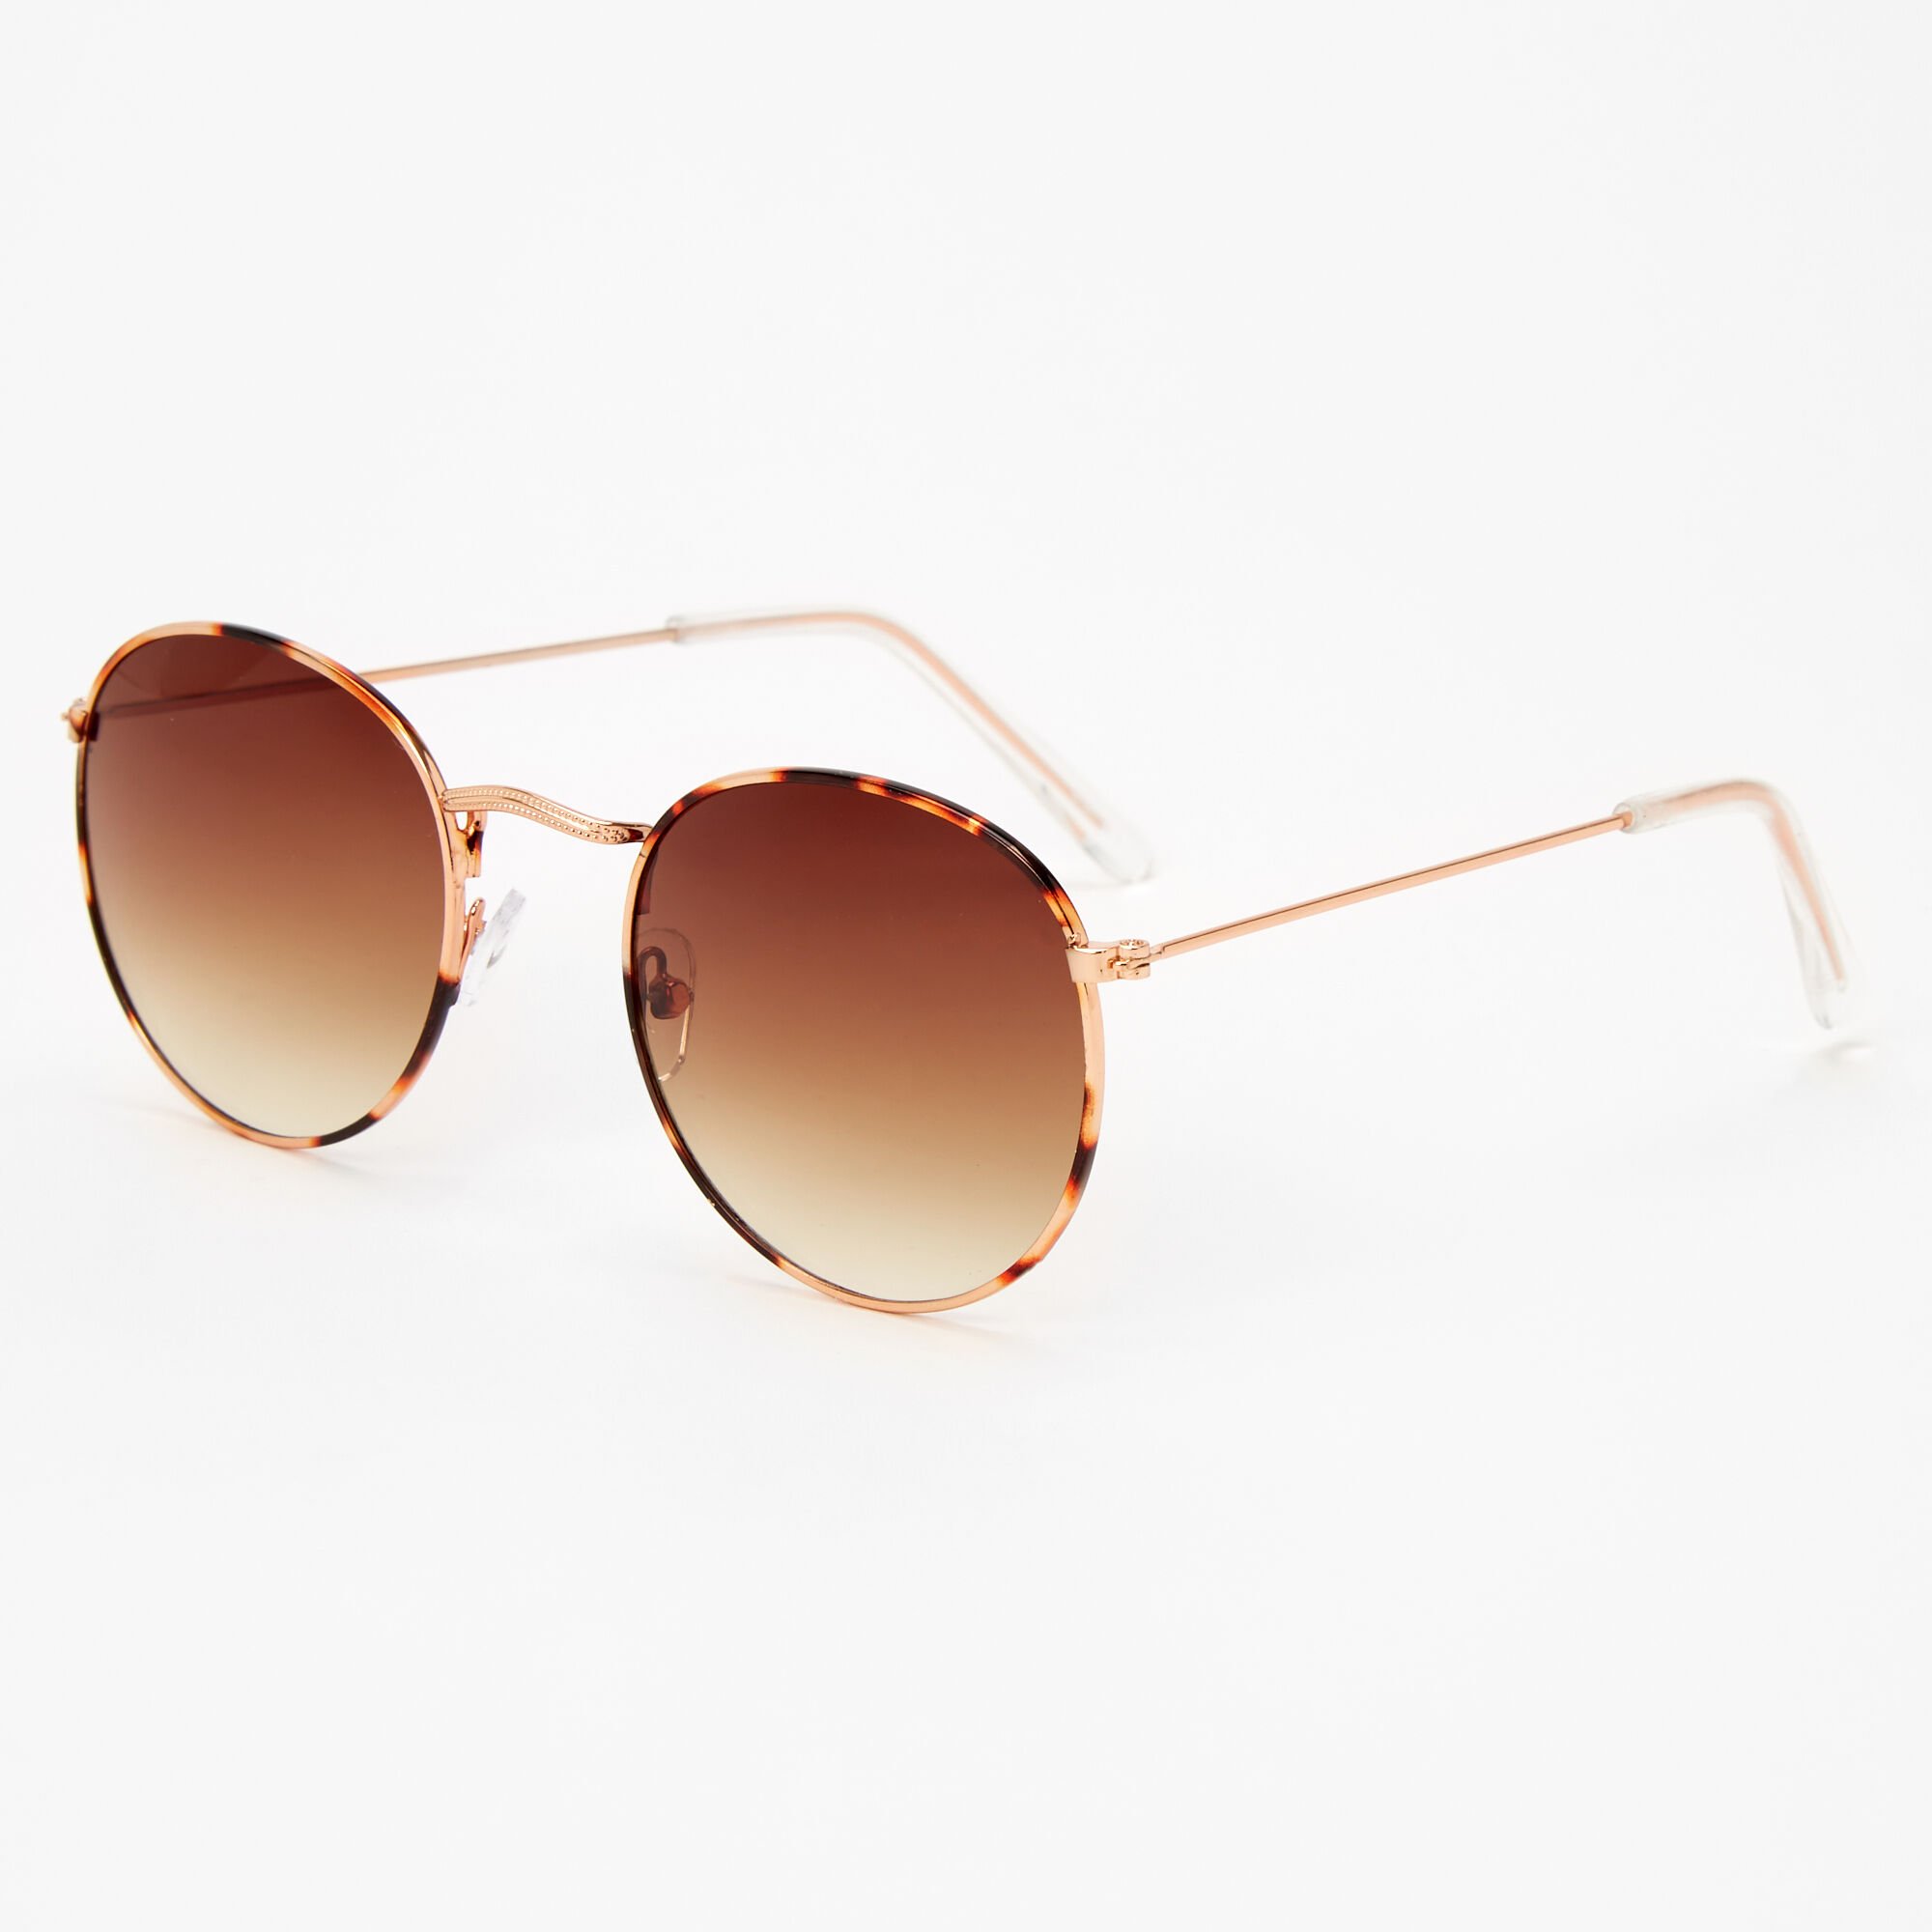 View Claires Tortoiseshell Round Sunglasses Gold information